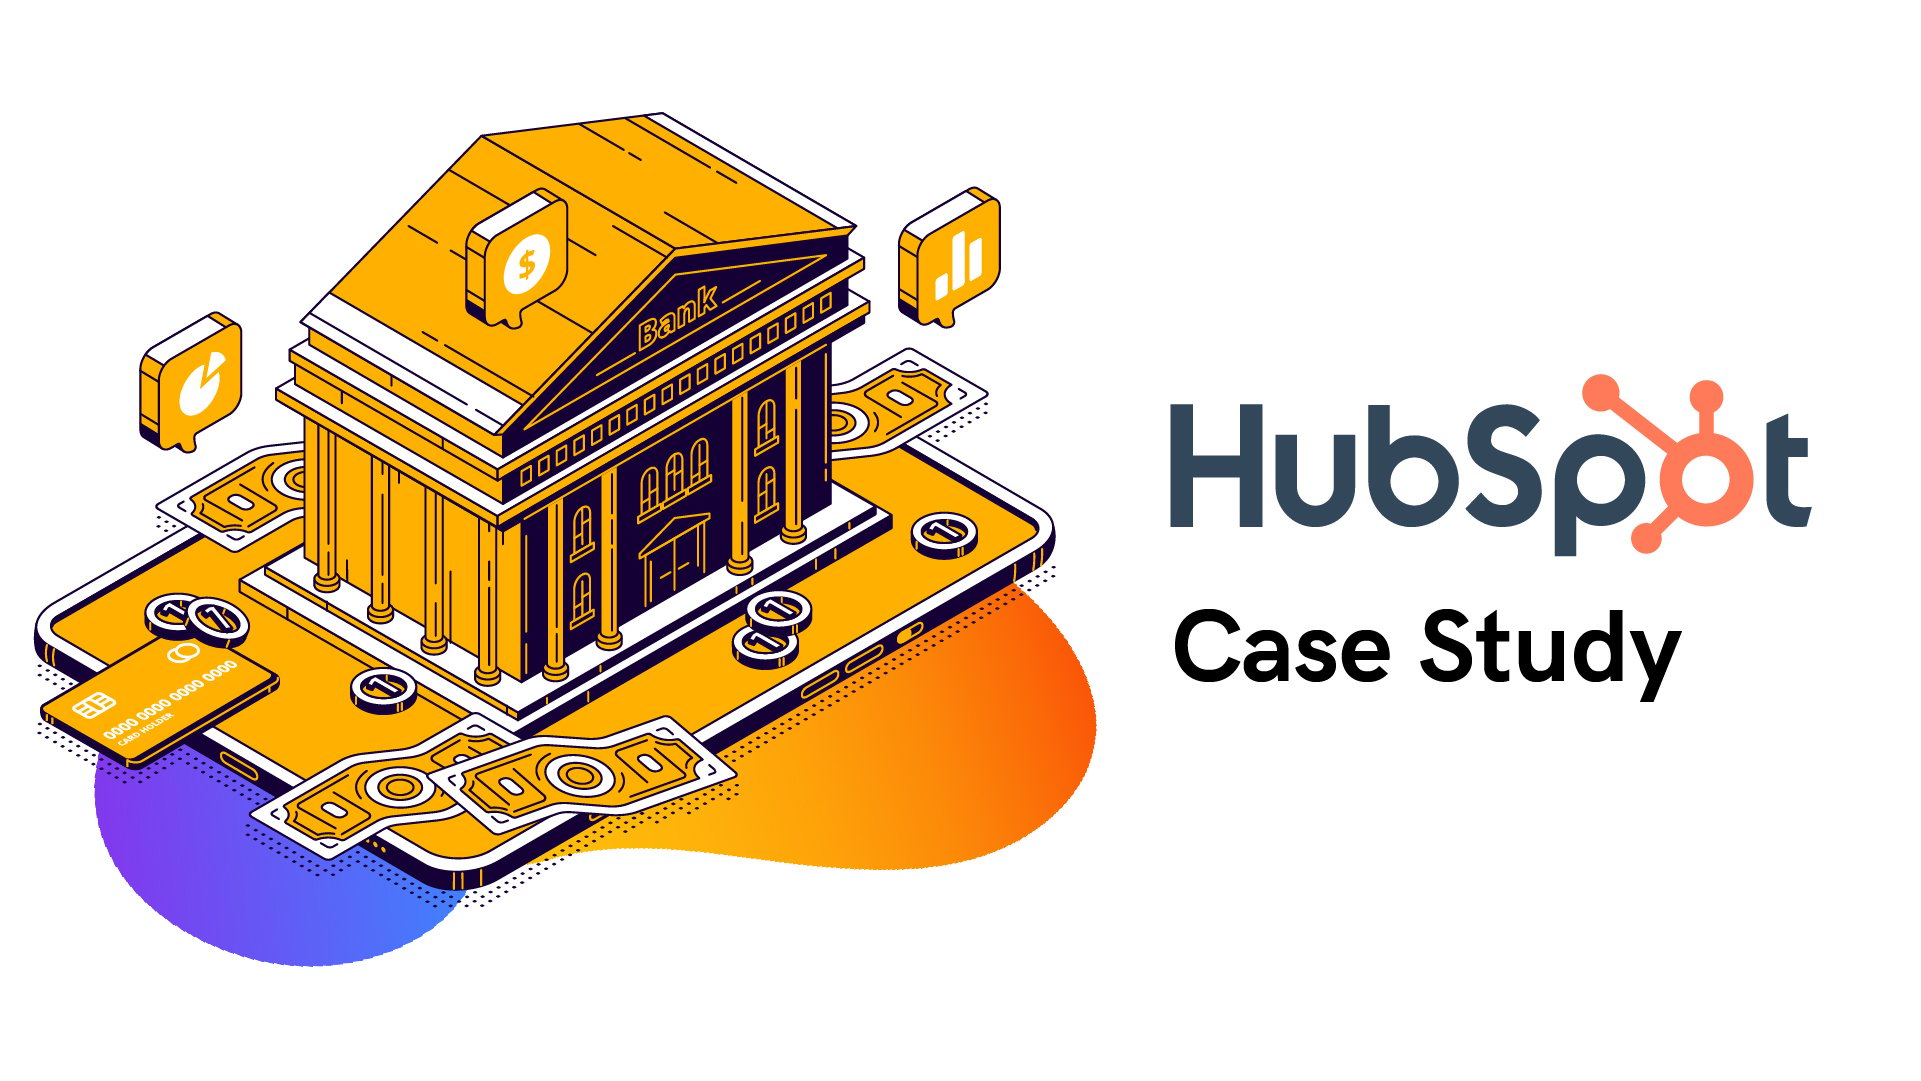 Managing Complex Customer and Account Associations for a Large Financial Institution with HubSpot Enterprise